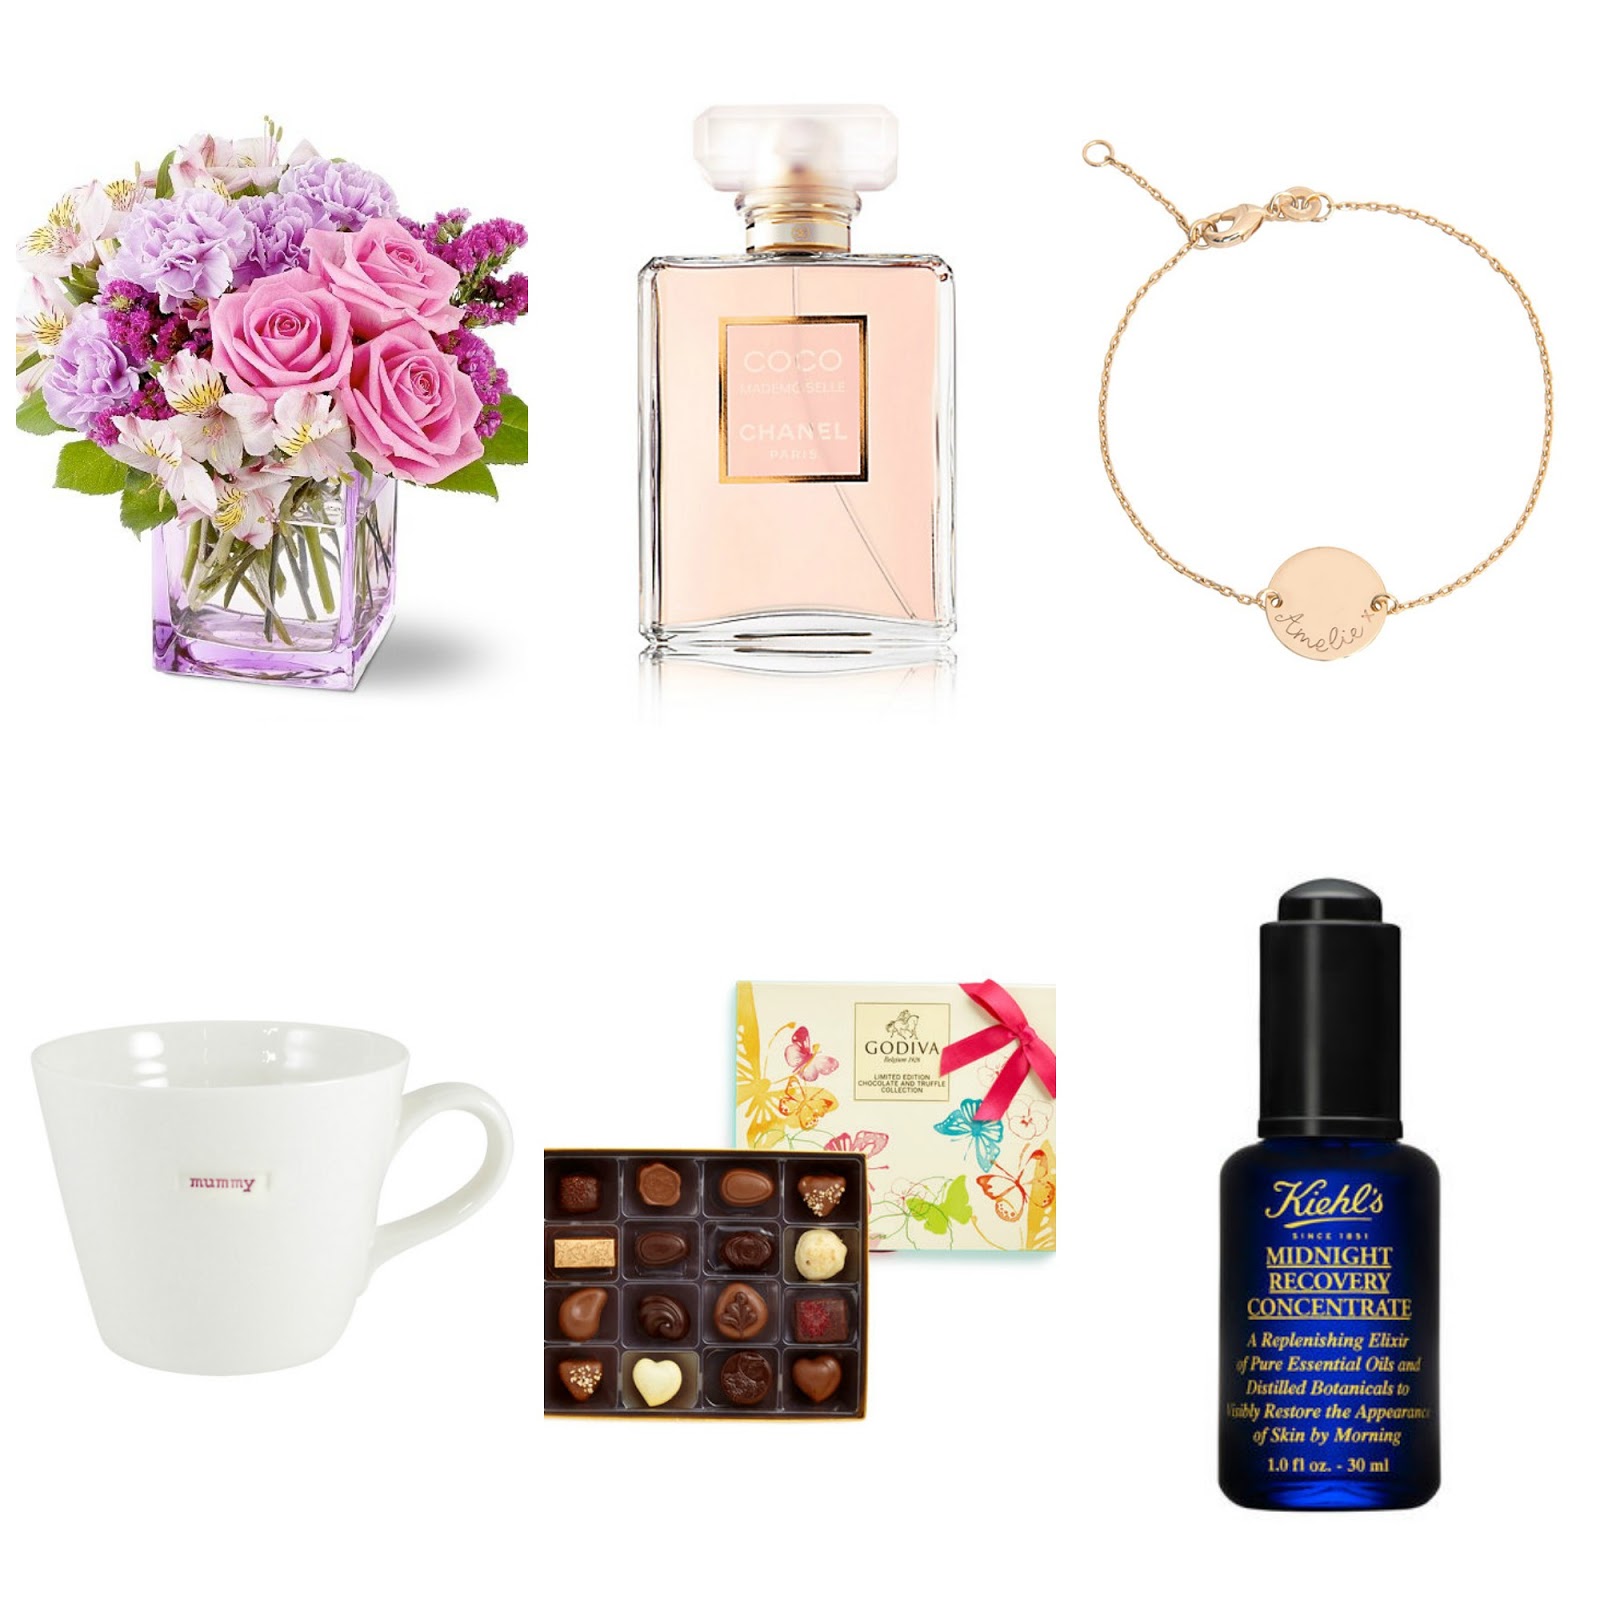 mothersday, gift guide, kiehls, john lewis, pretty flowers, chocolates, pretty gifts